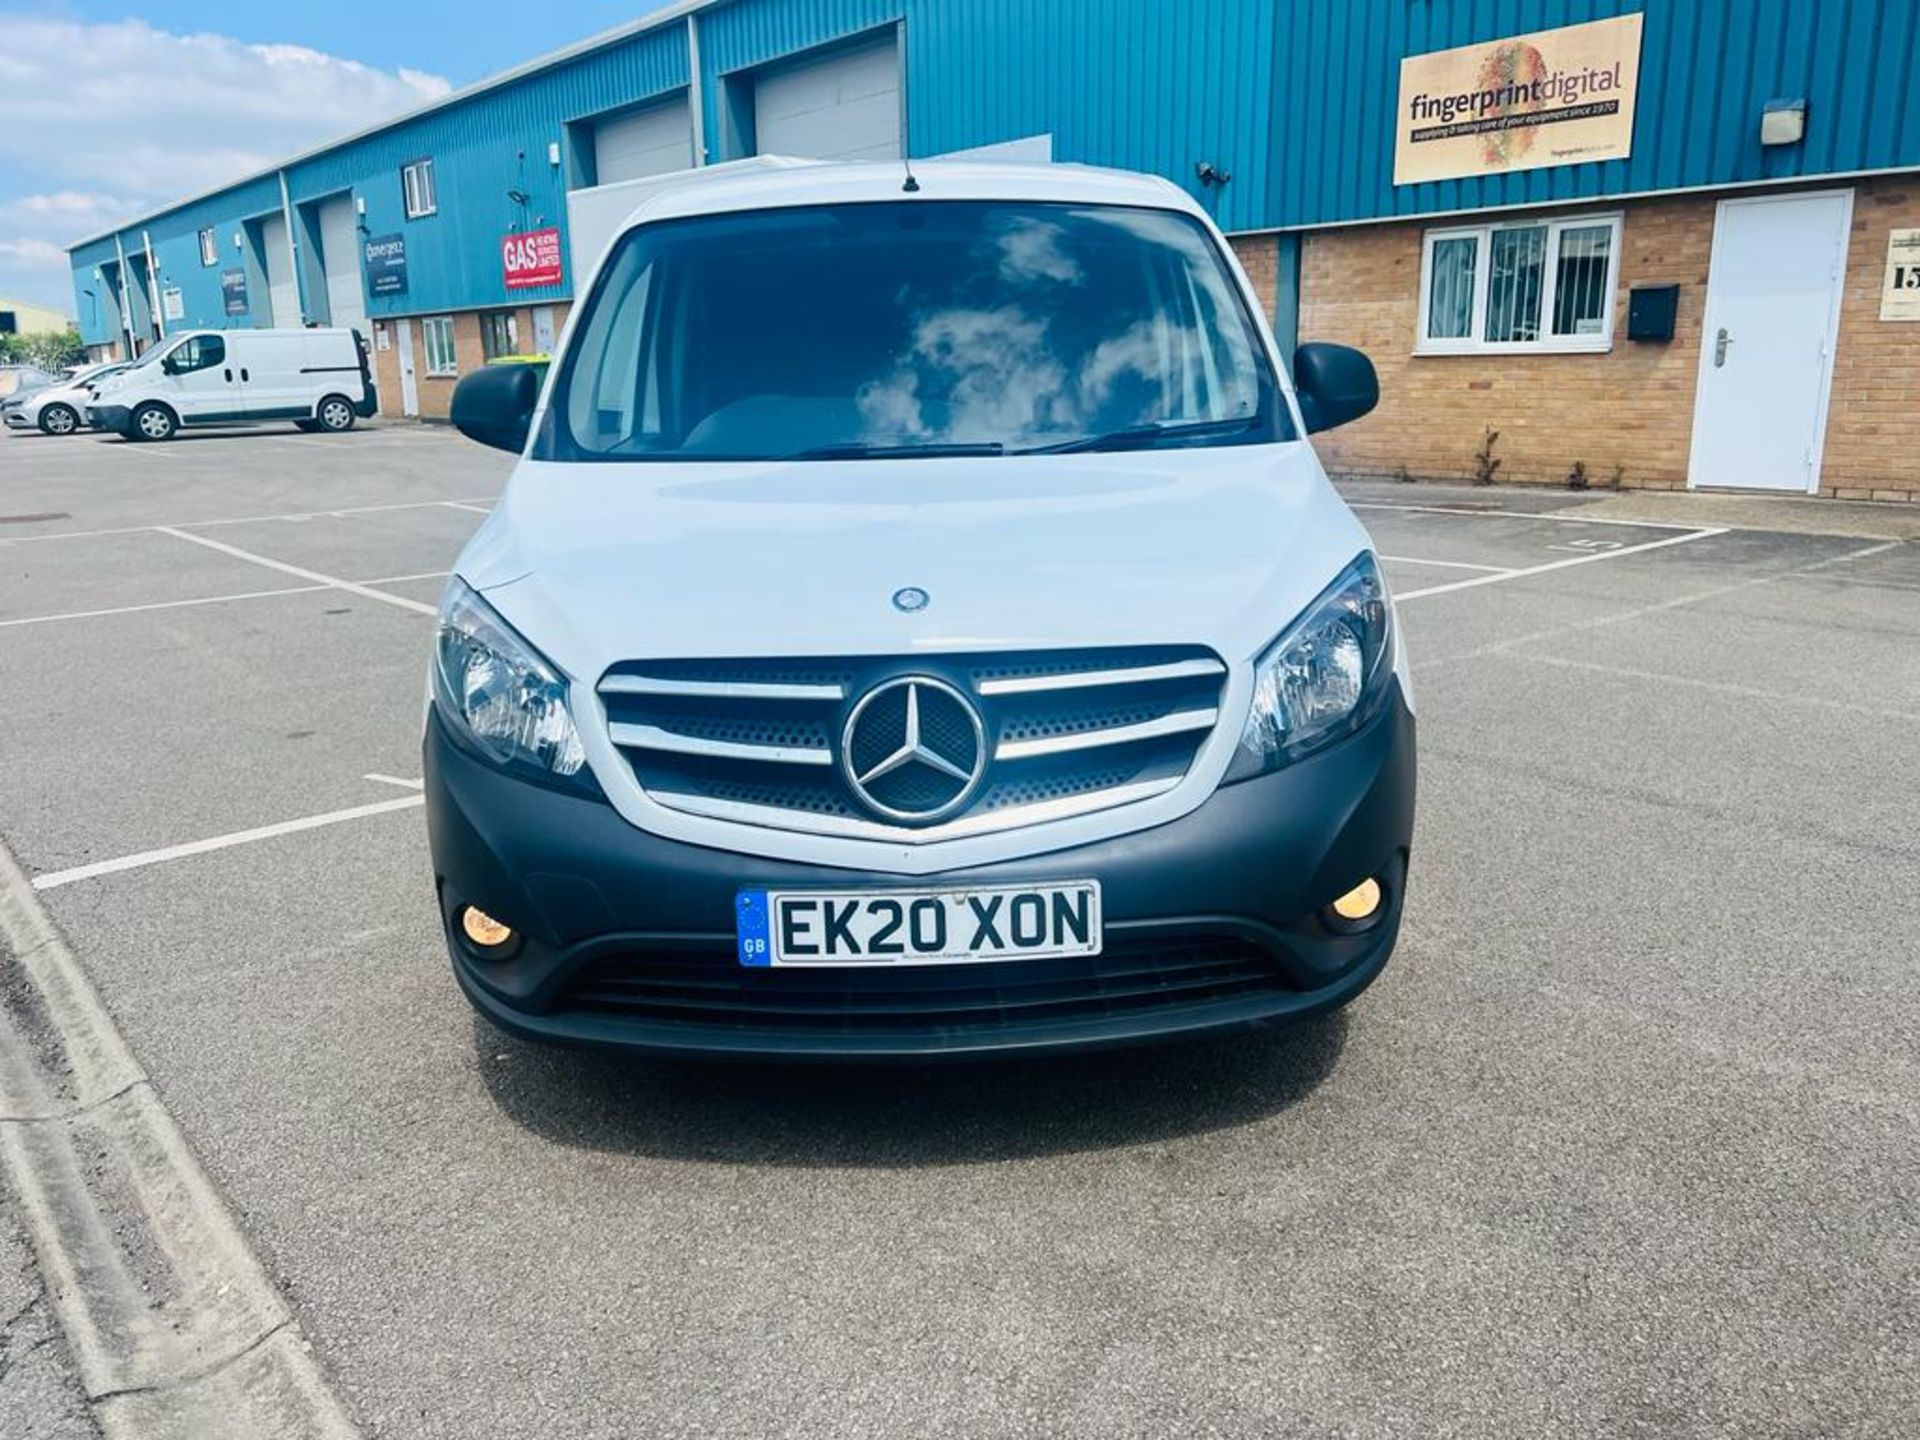 Mercedes Citan 1.5 109 CDI LWB - 2020 20Reg - 1 Owner From New - Air Con - ONLY 60k - Image 8 of 21